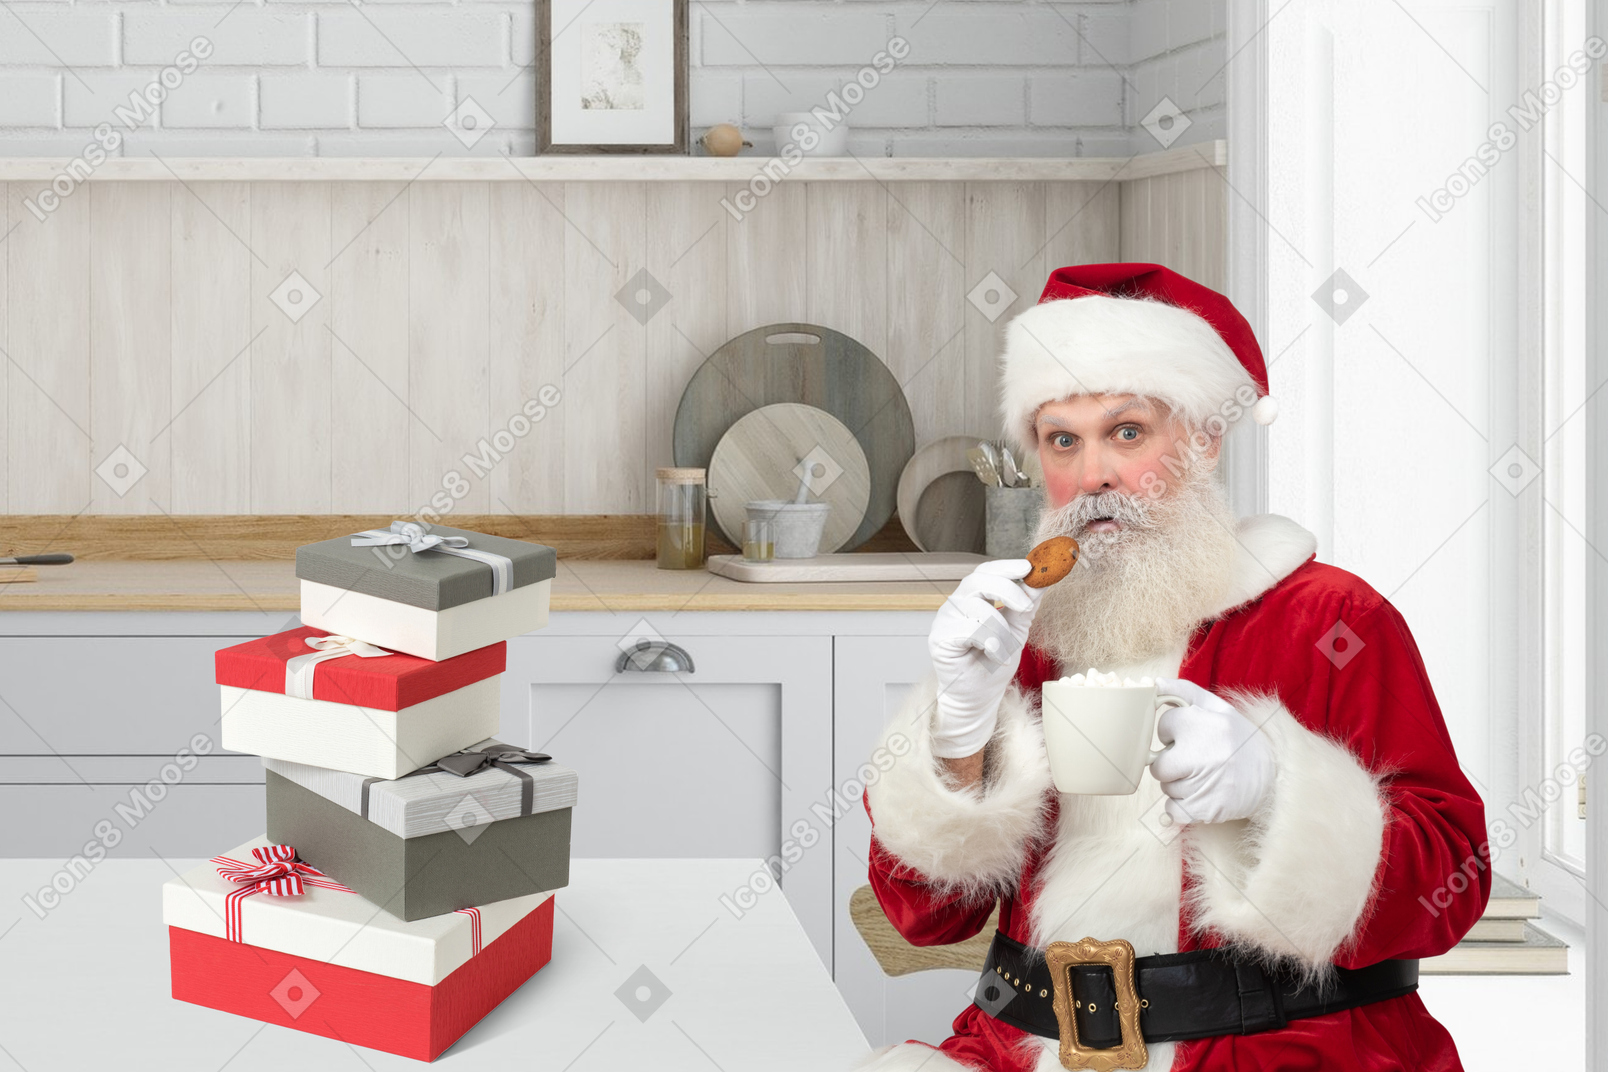 Santa eating a cookie near a stack of gifts